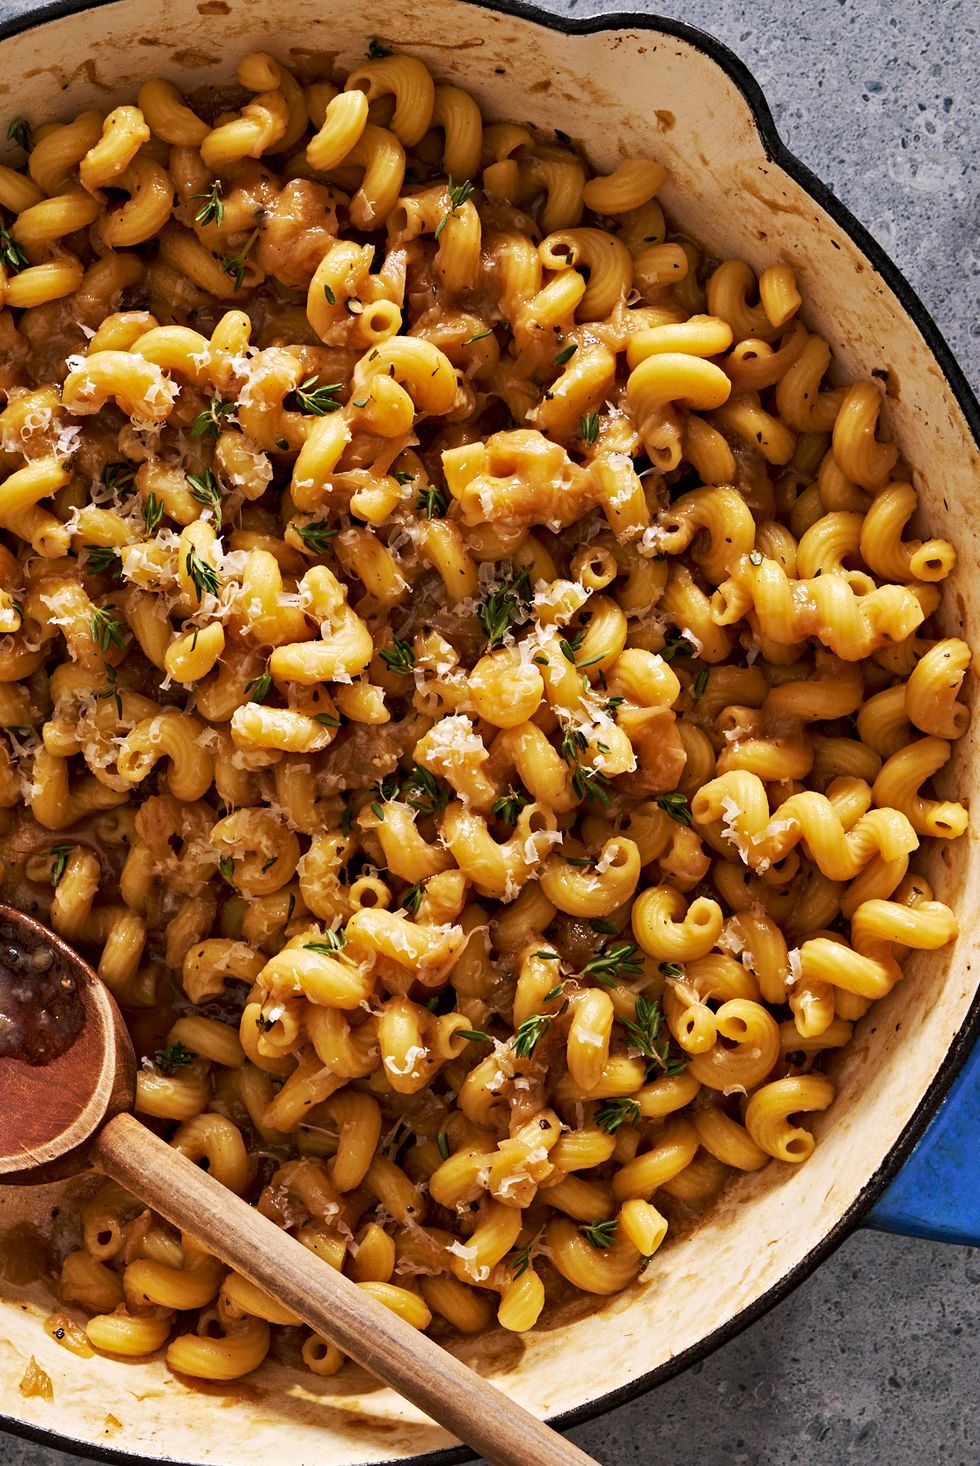 https://hips.hearstapps.com/hmg-prod/images/one-pot-french-onion-pasta-lead-643039ae7e069.jpg?crop=0.668xw:1.00xh;0.0272xw,0&resize=980:*